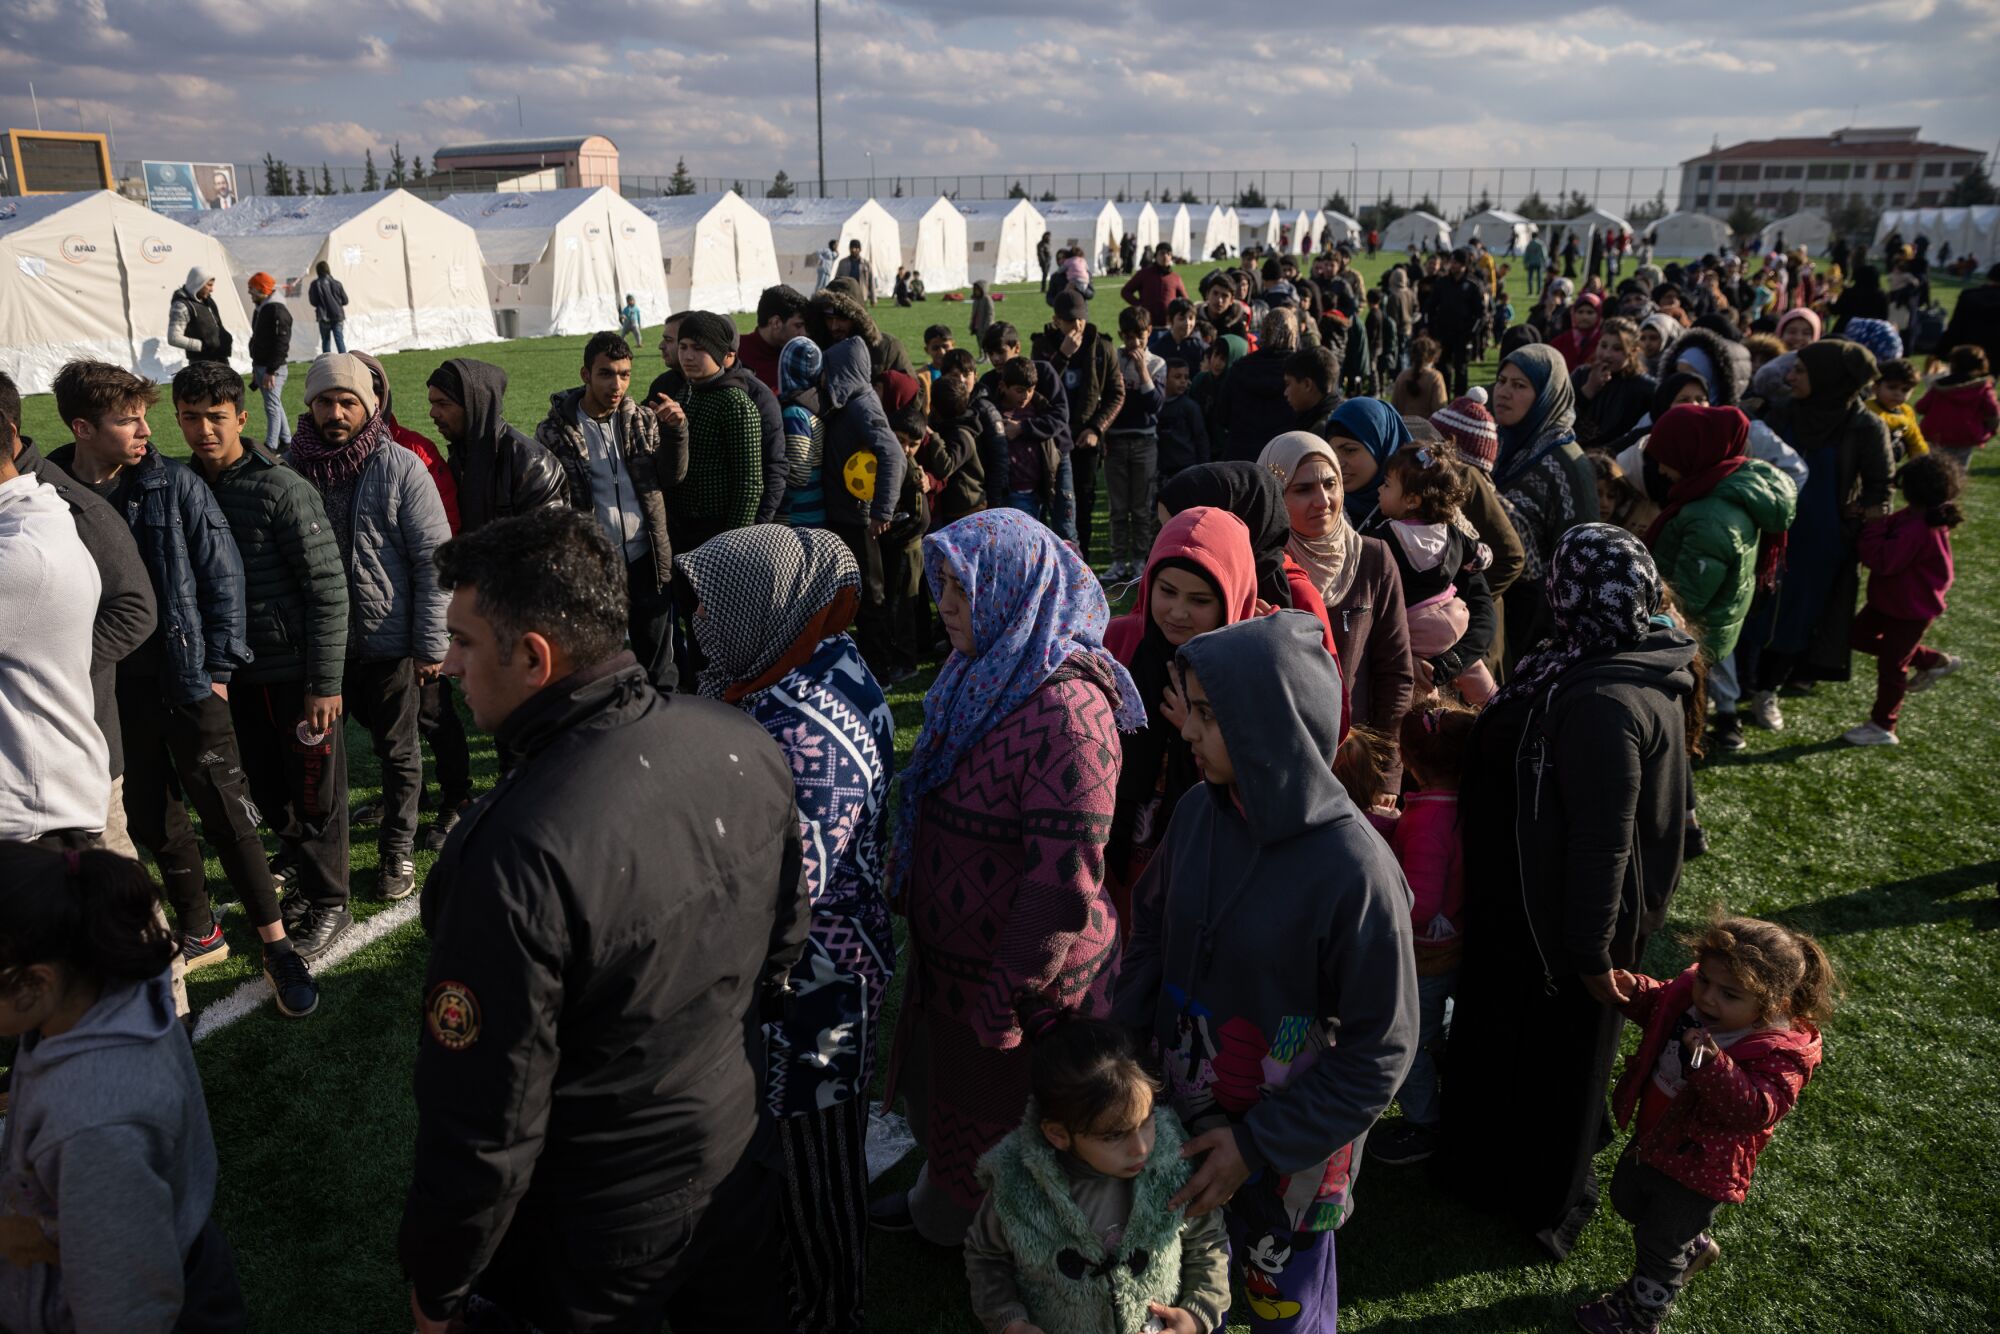 Displaced Syrians stand in line for food next to a row of tents.